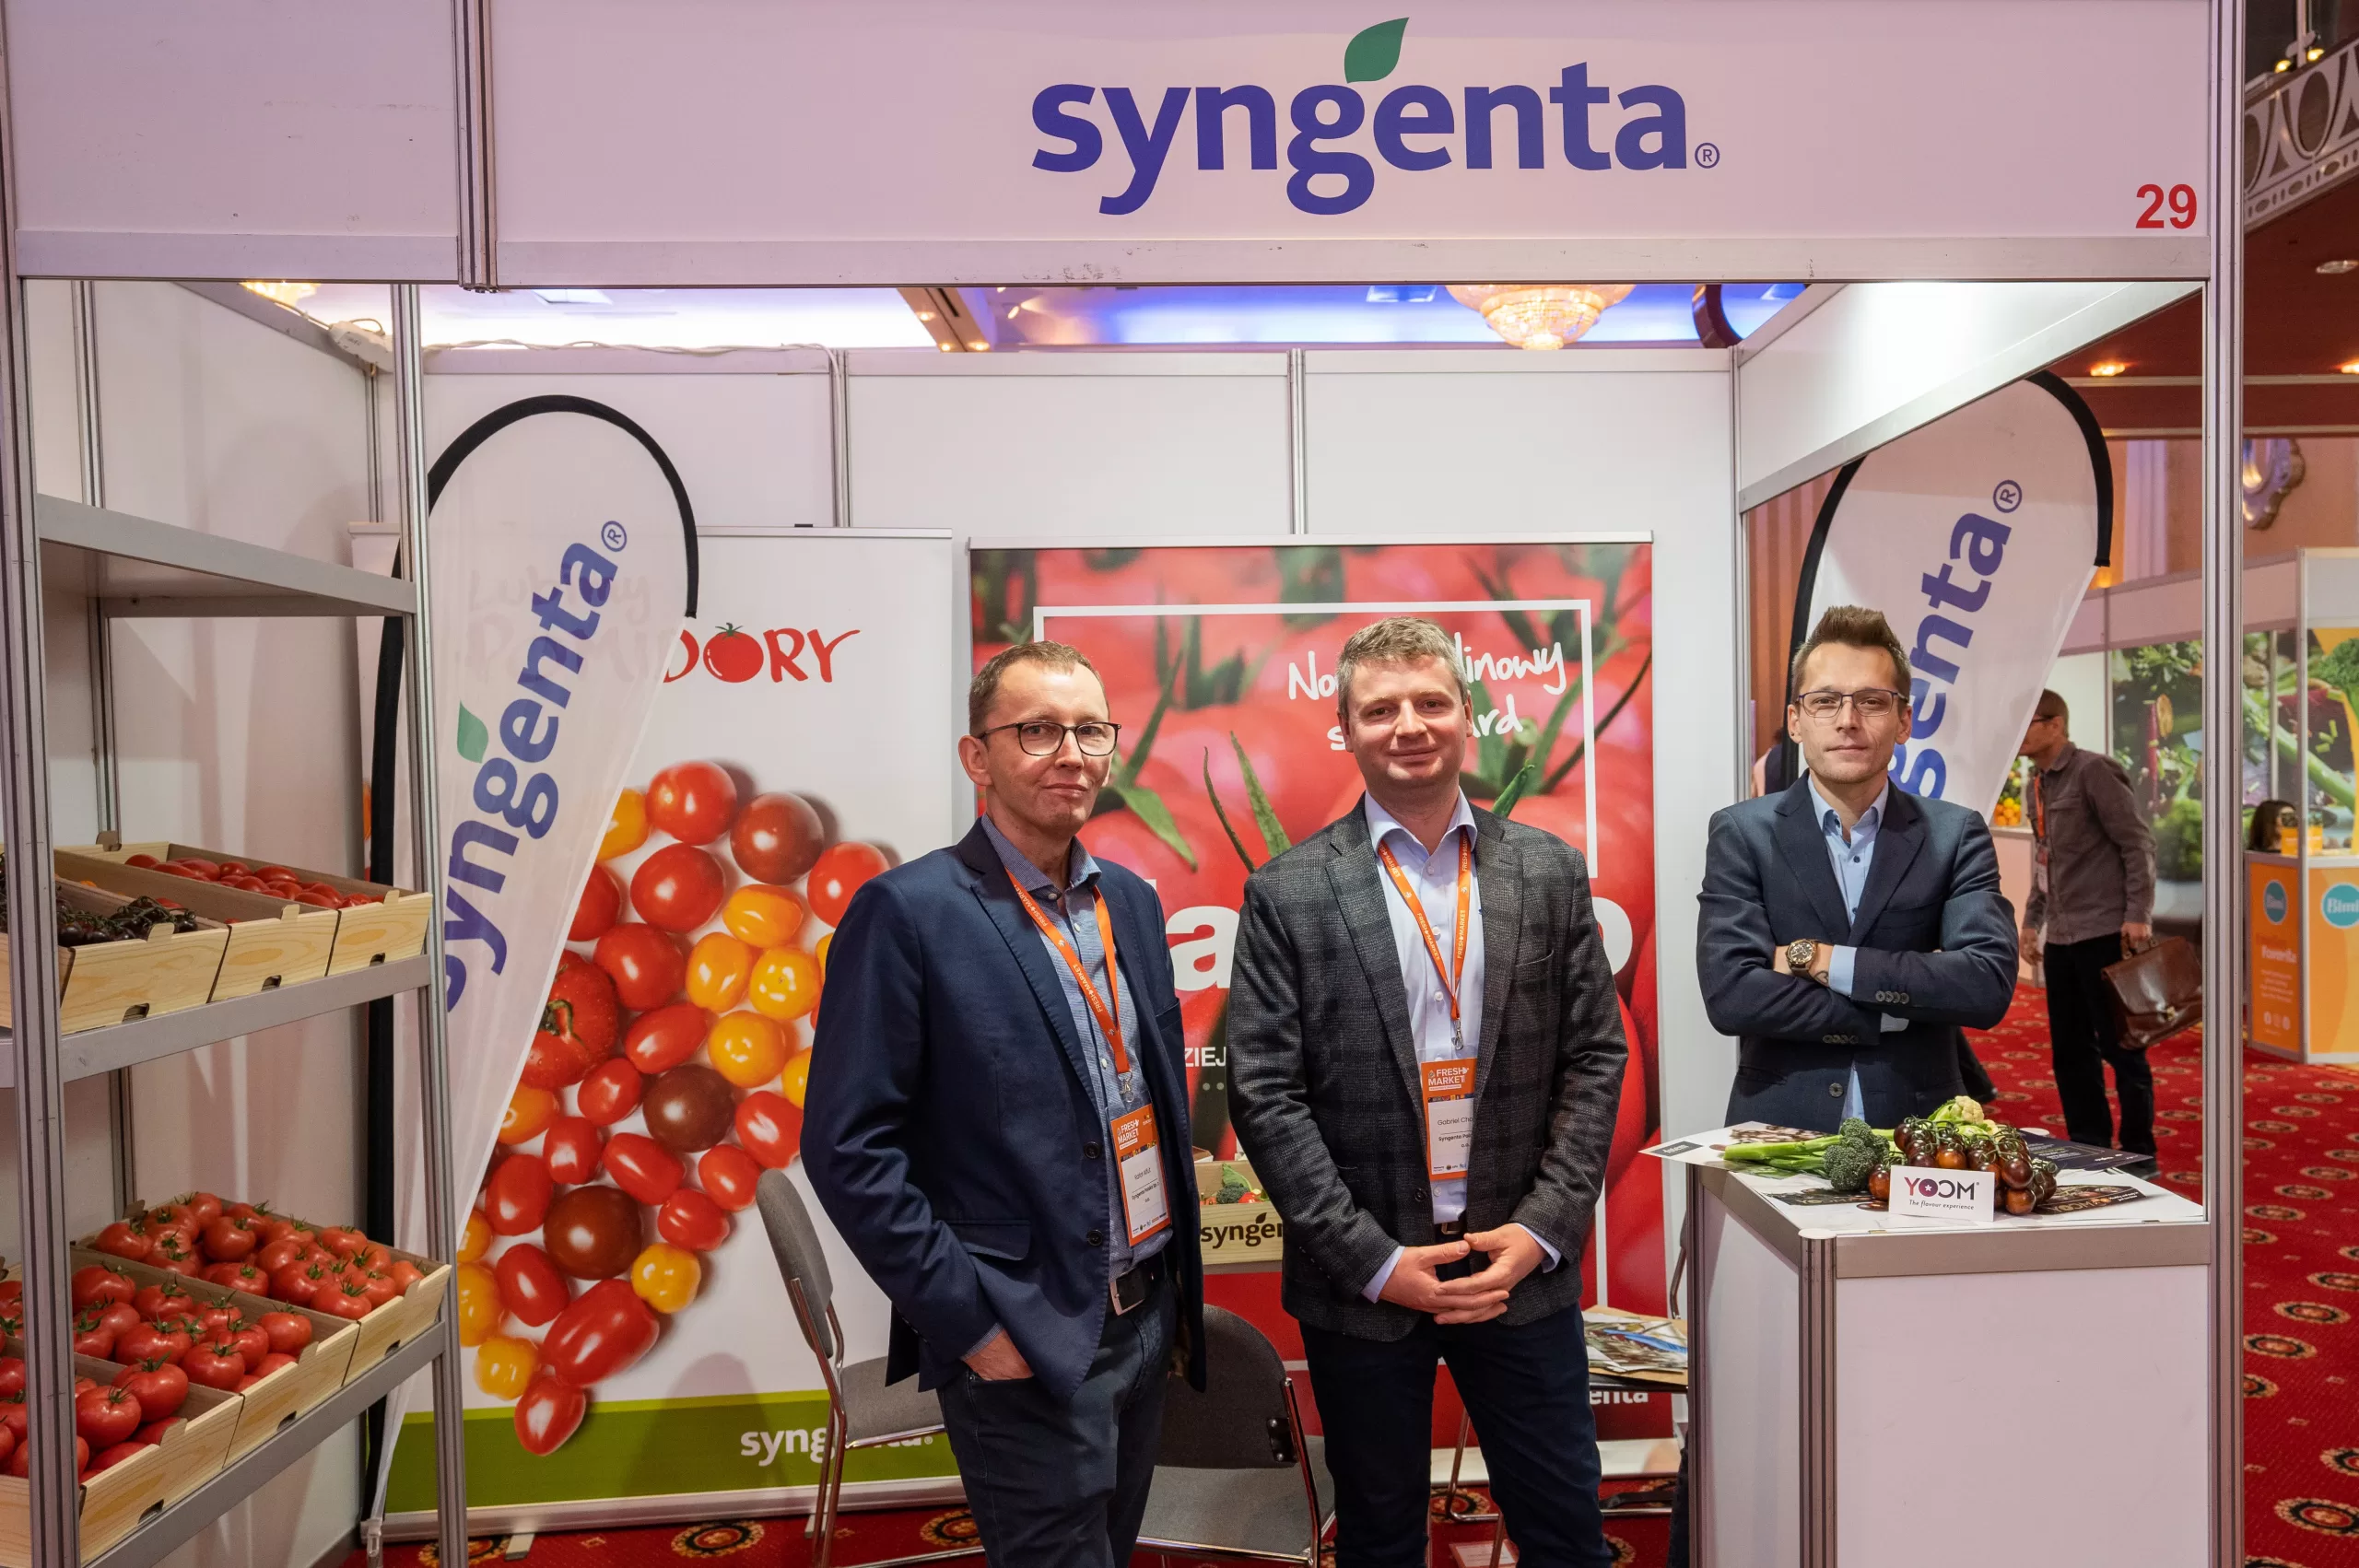 The Syngenta stand attracted the attention of the participants!